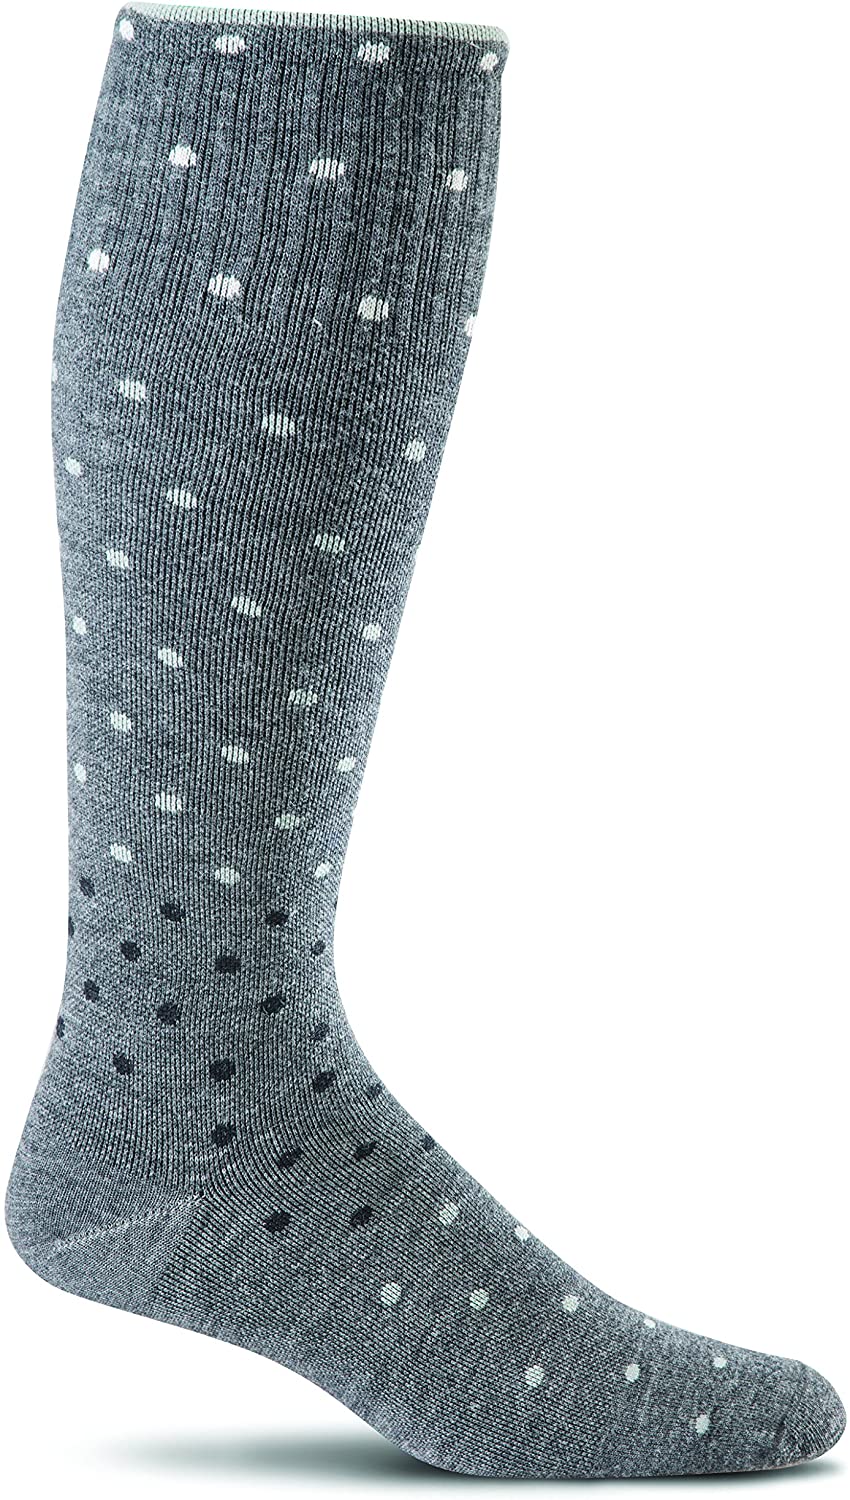 Sockwell Women's On the Spot Sock in Charcoal color from the side